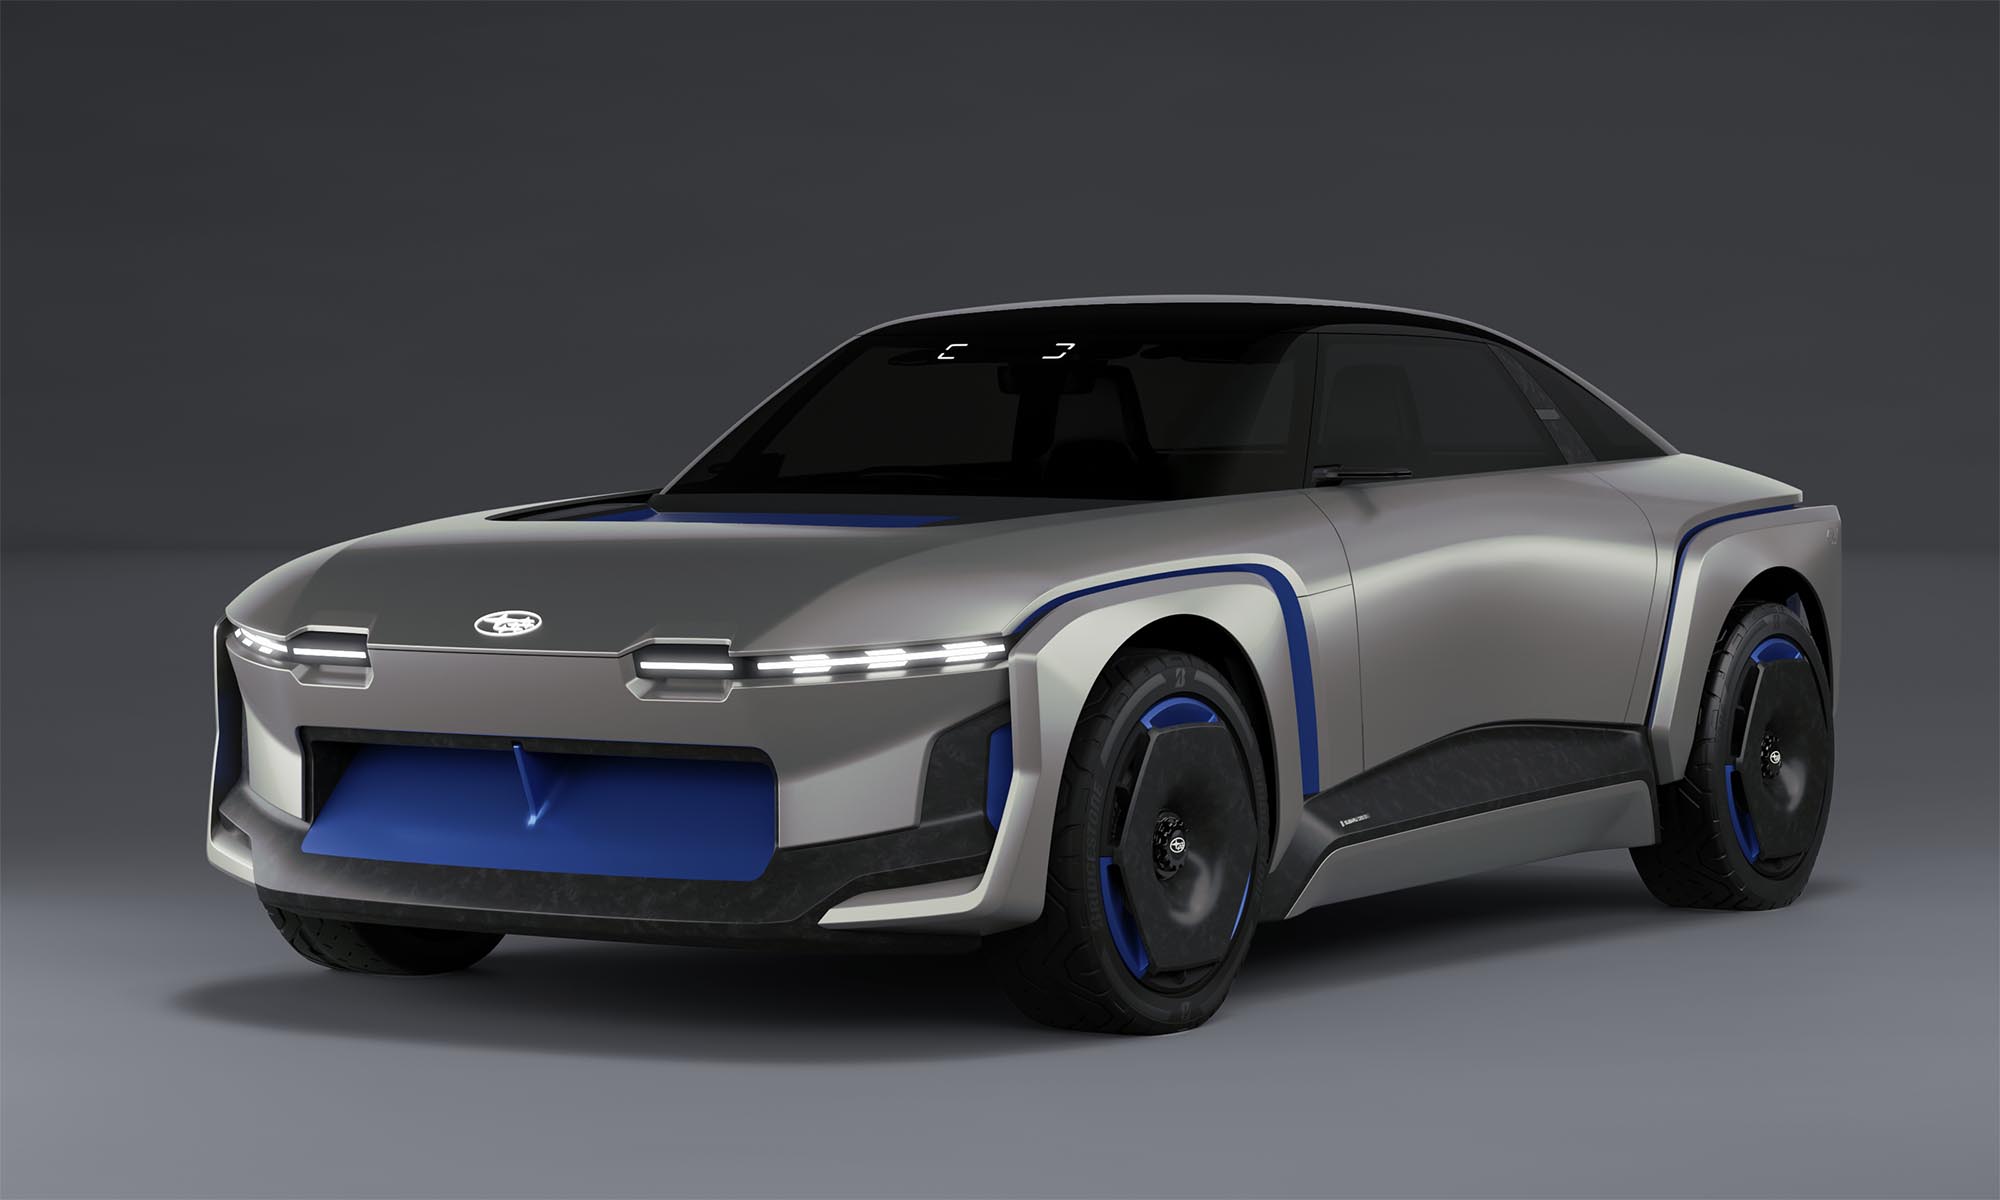 There may also be a place for a sports car in Subaru’s future